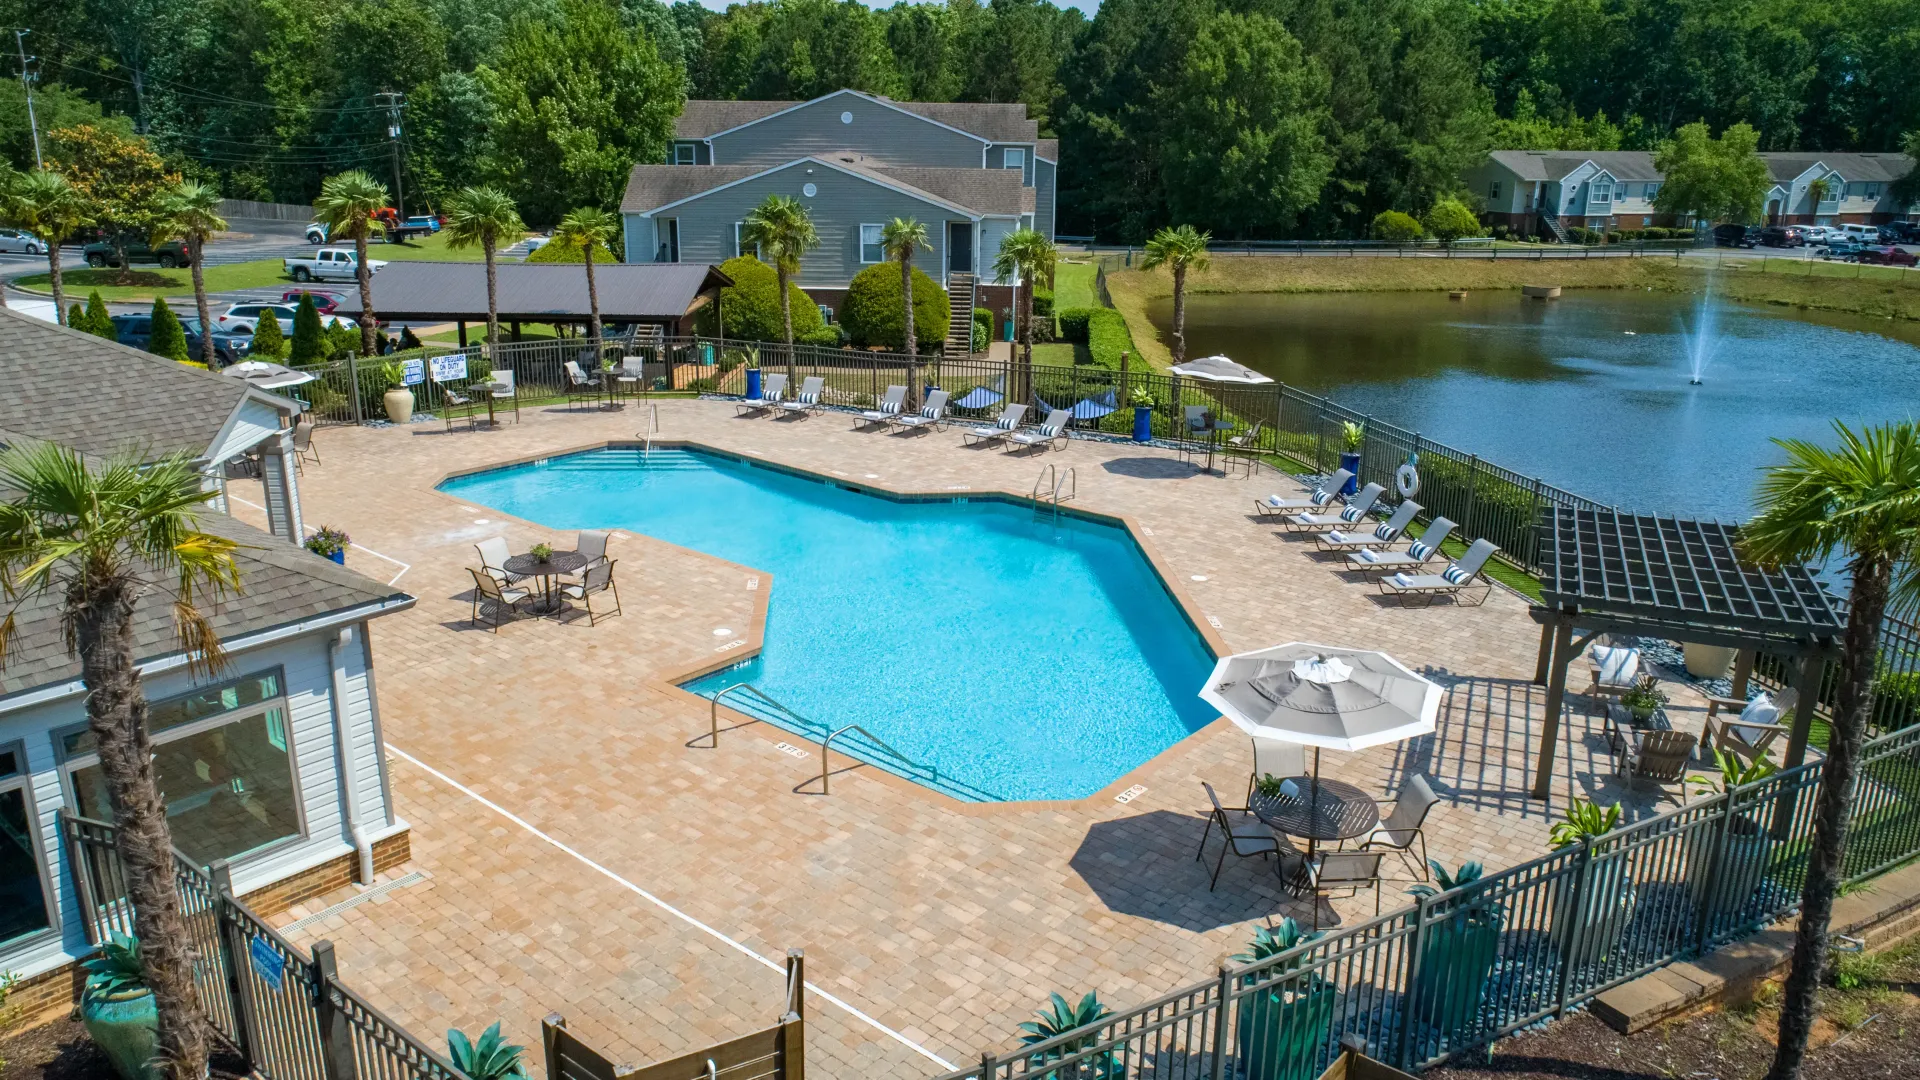 From above, the shimmering pool, extensive deck, lush greenery, and tranquil lake with a fountain create a breathtaking vista.